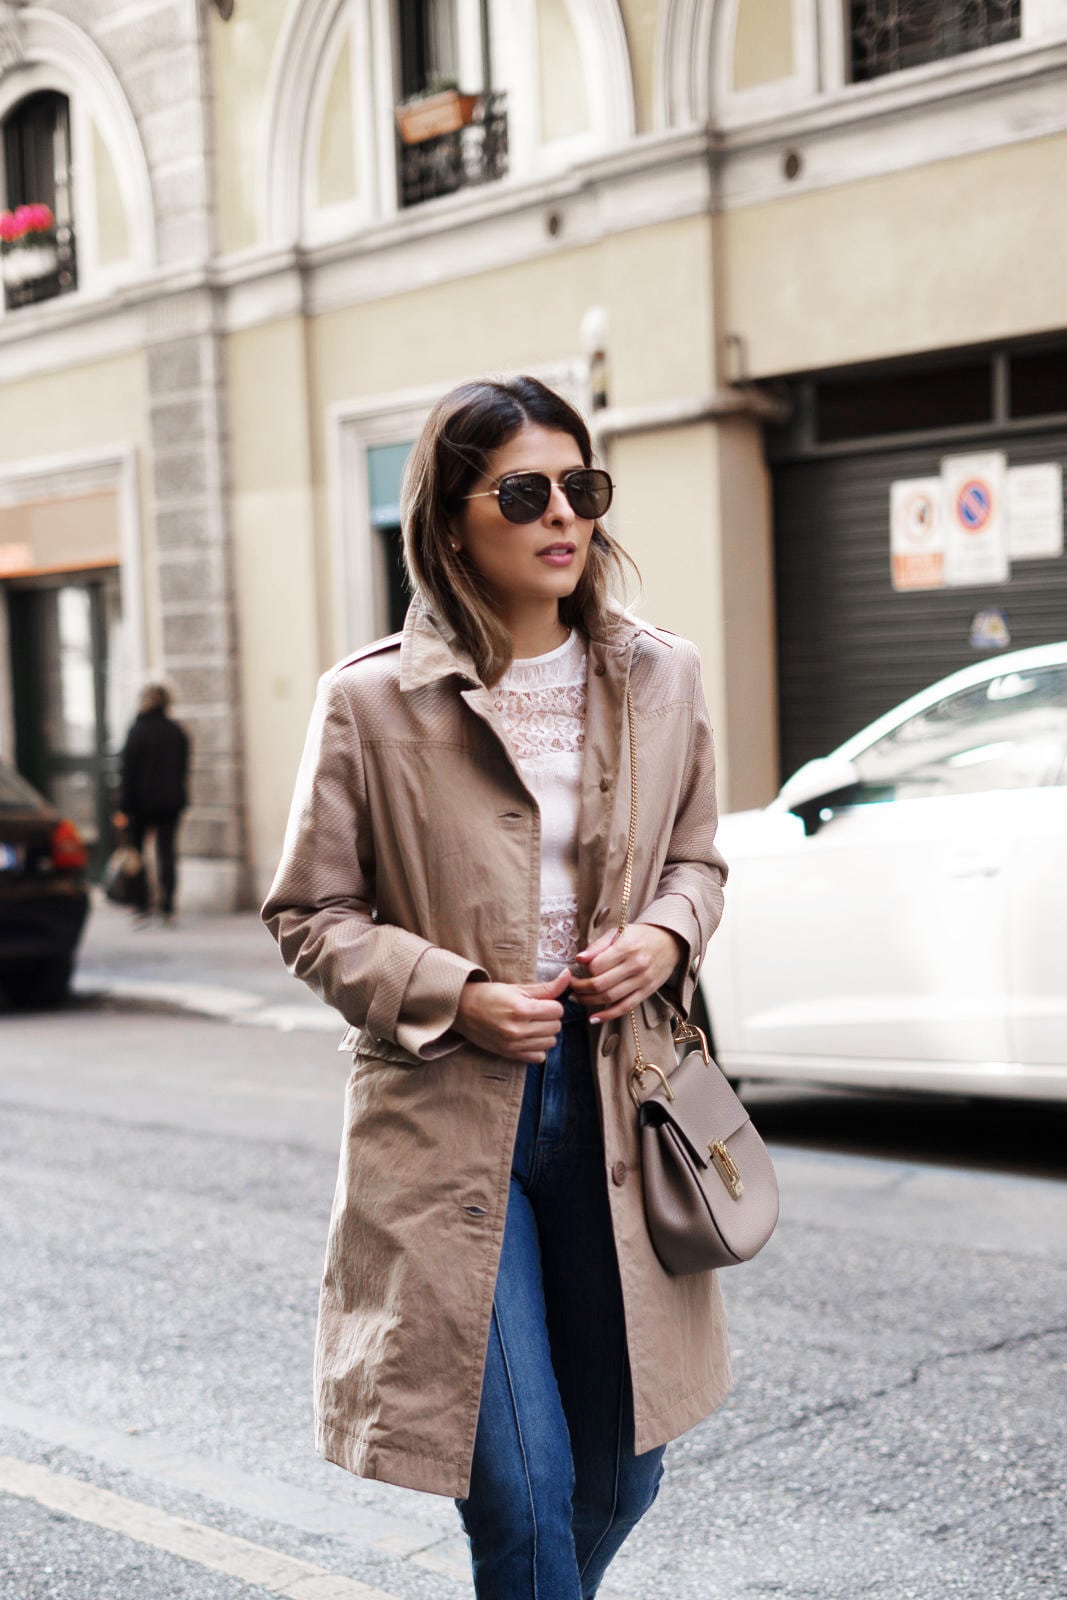 The Chic Way to Style a Trench Coat - The Girl from Panama